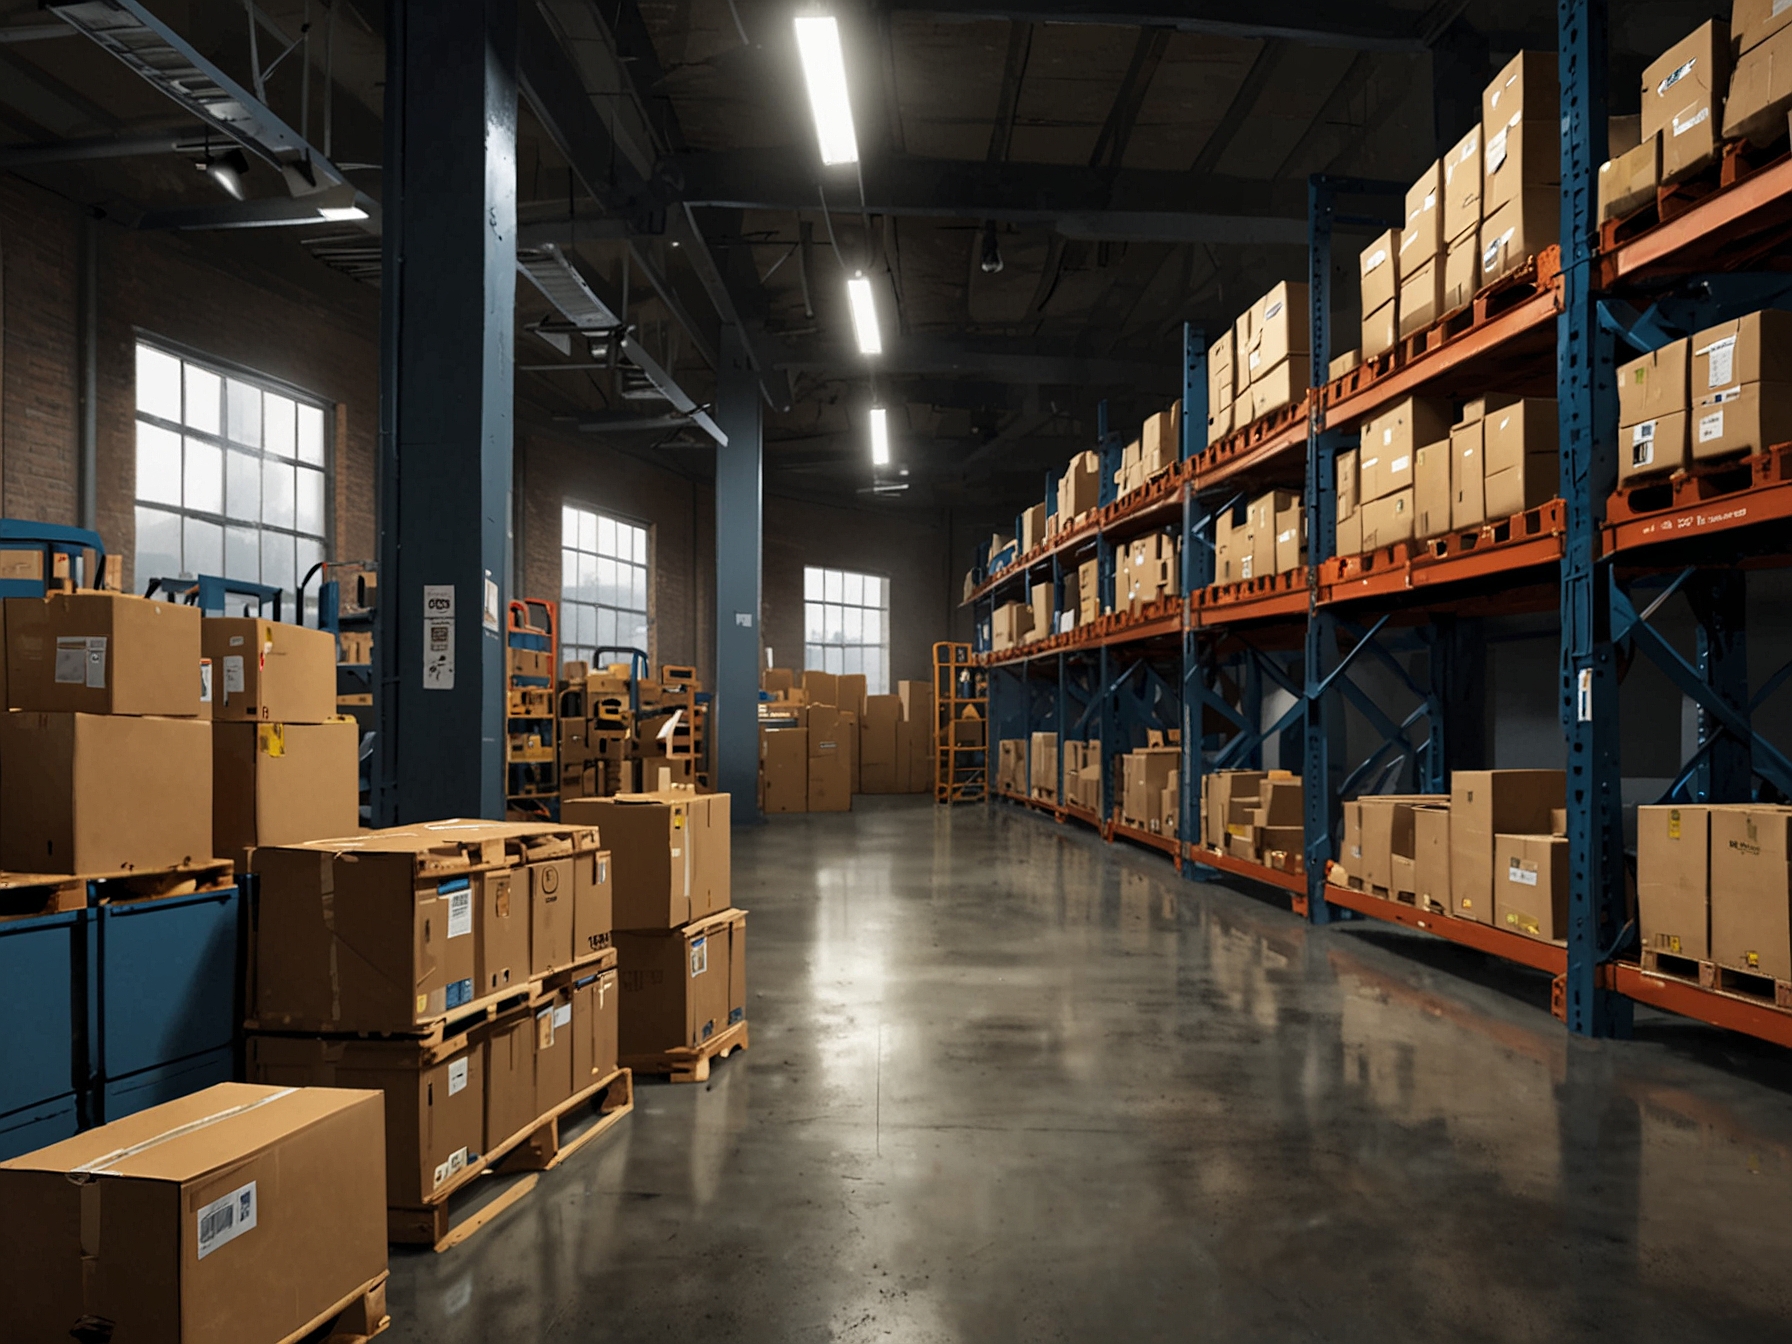 A warehouse filled with various industrial supplies, showcasing Grainger’s extensive product portfolio and illustrating the diverse range of products they offer to businesses in maintenance, repair, and operations fields.